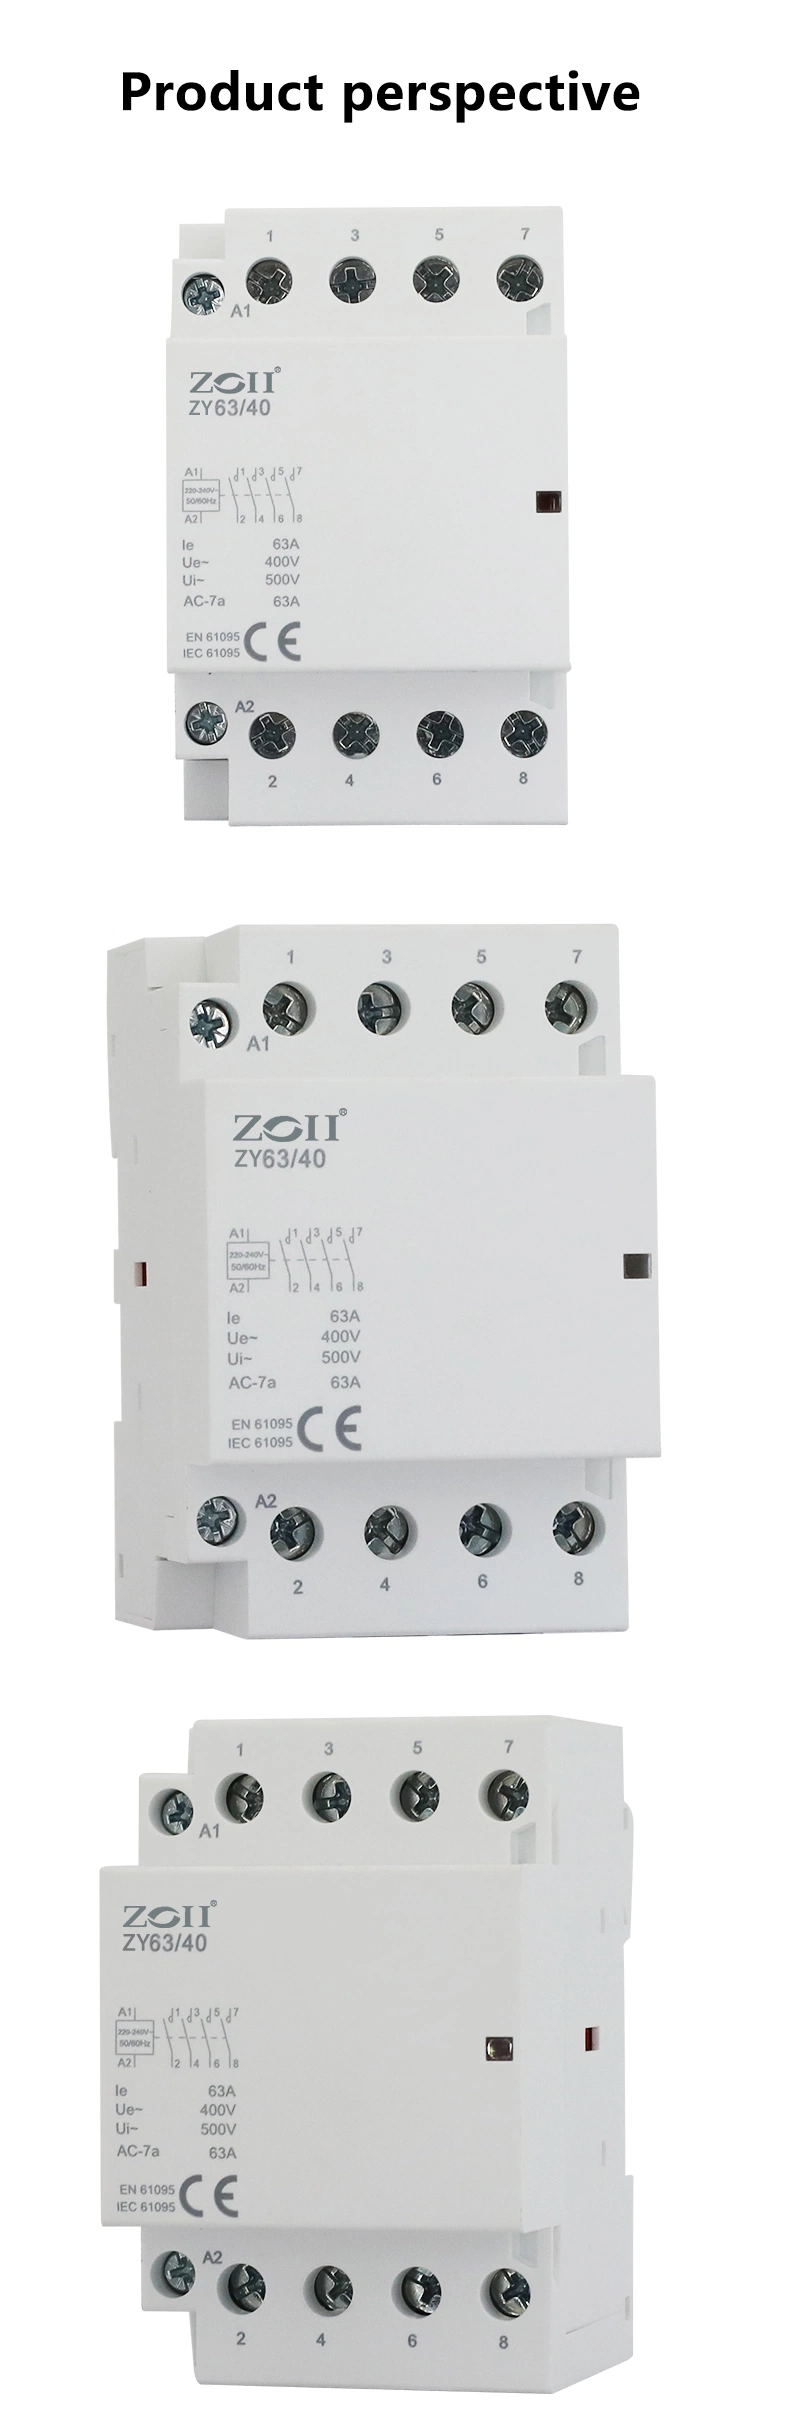 Hot Selling Zoii CT 25A 220V 1no1nc AC Contactor Automatic Type Modular Contactor